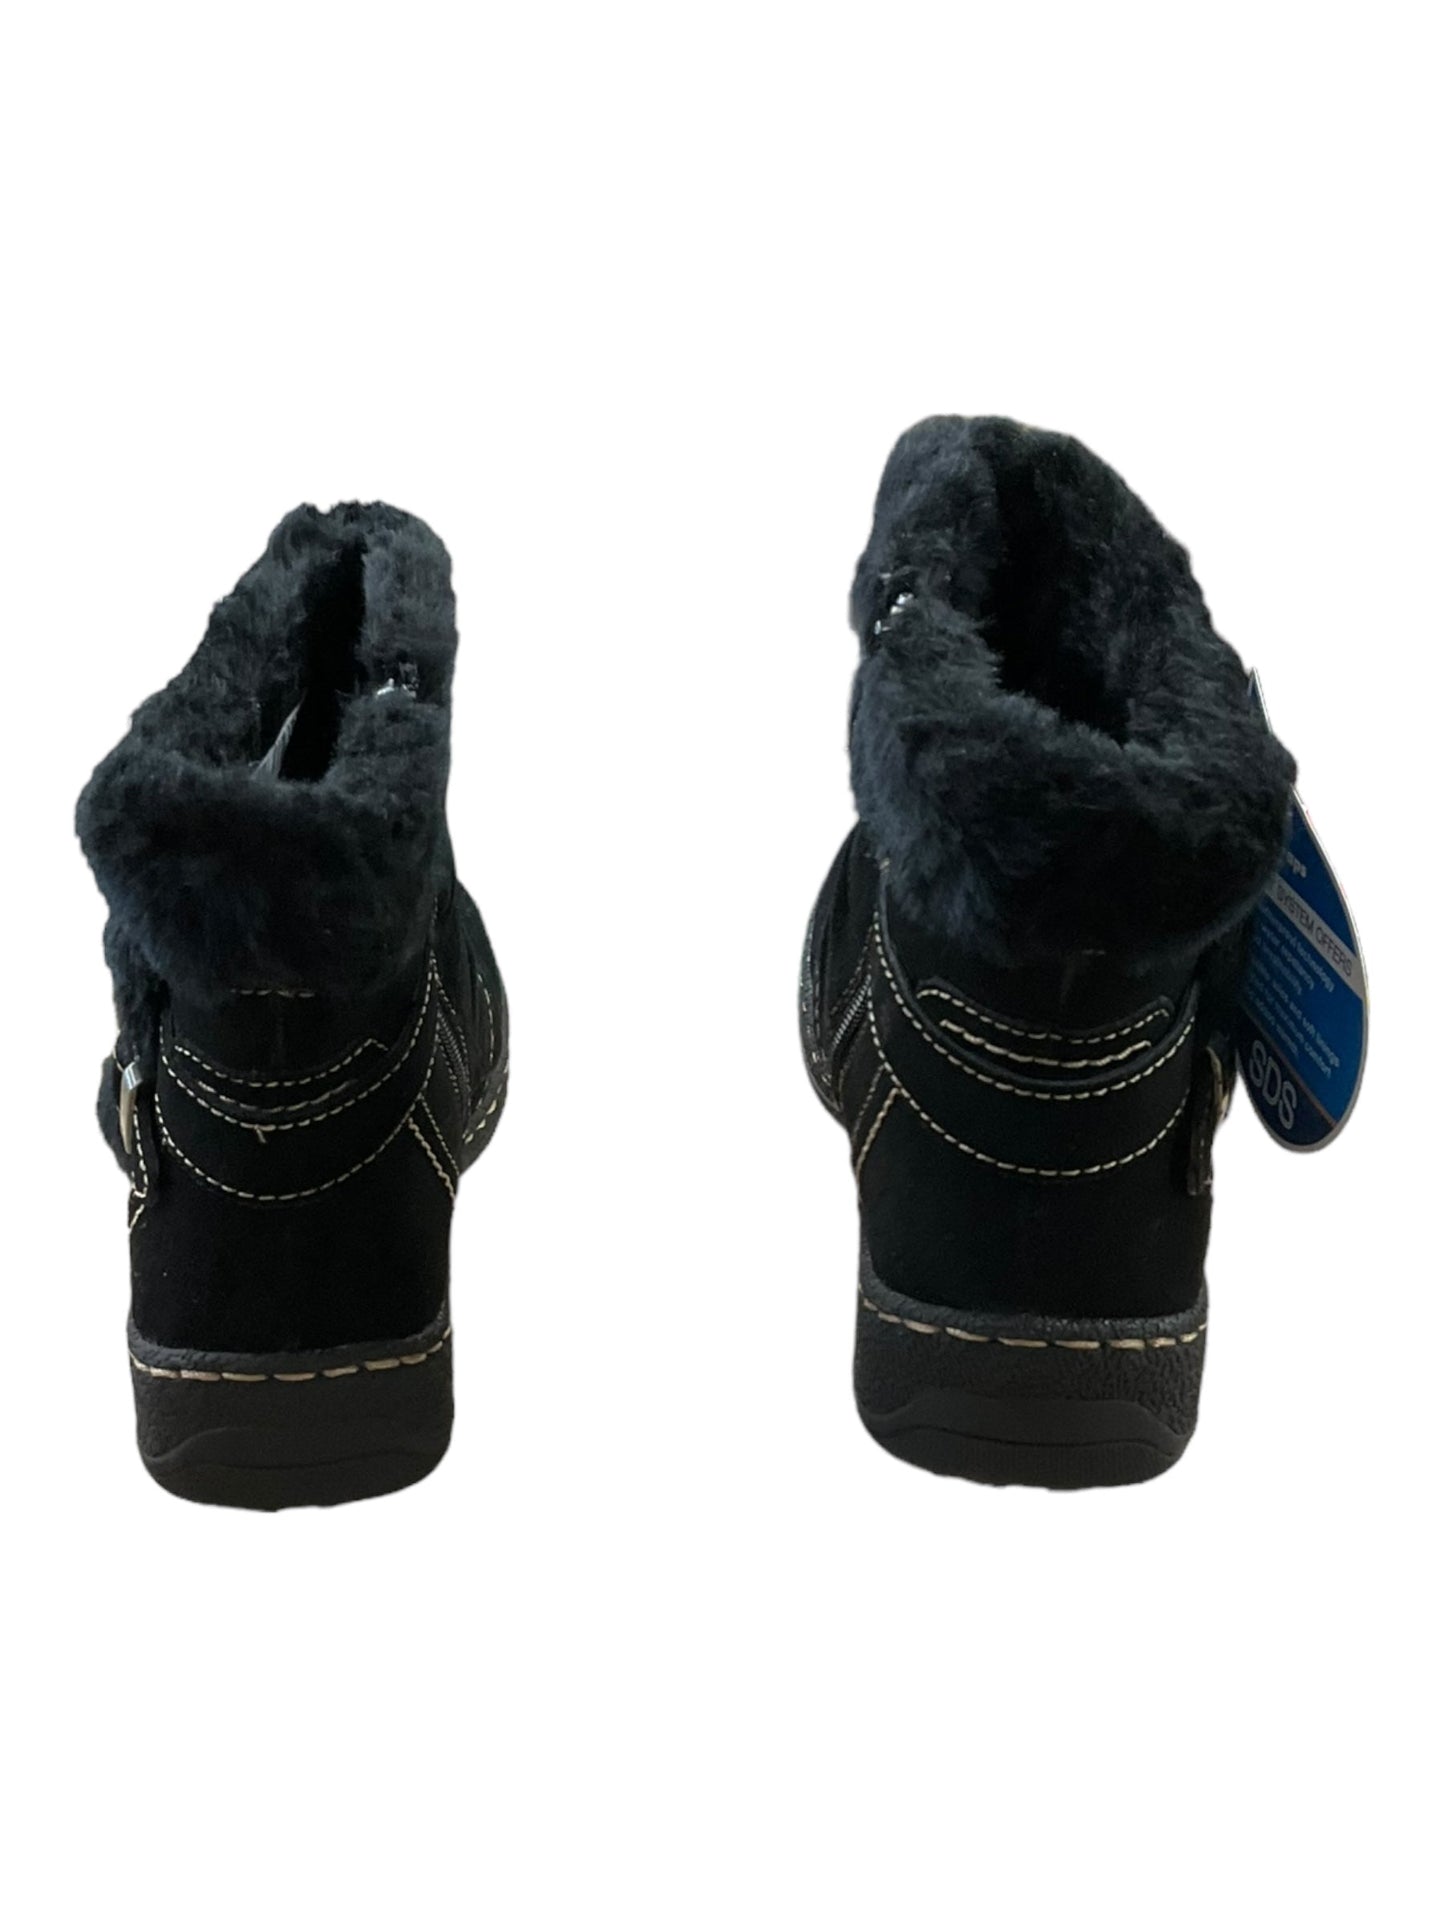 Boots Snow By Bare Traps  Size: 6.5